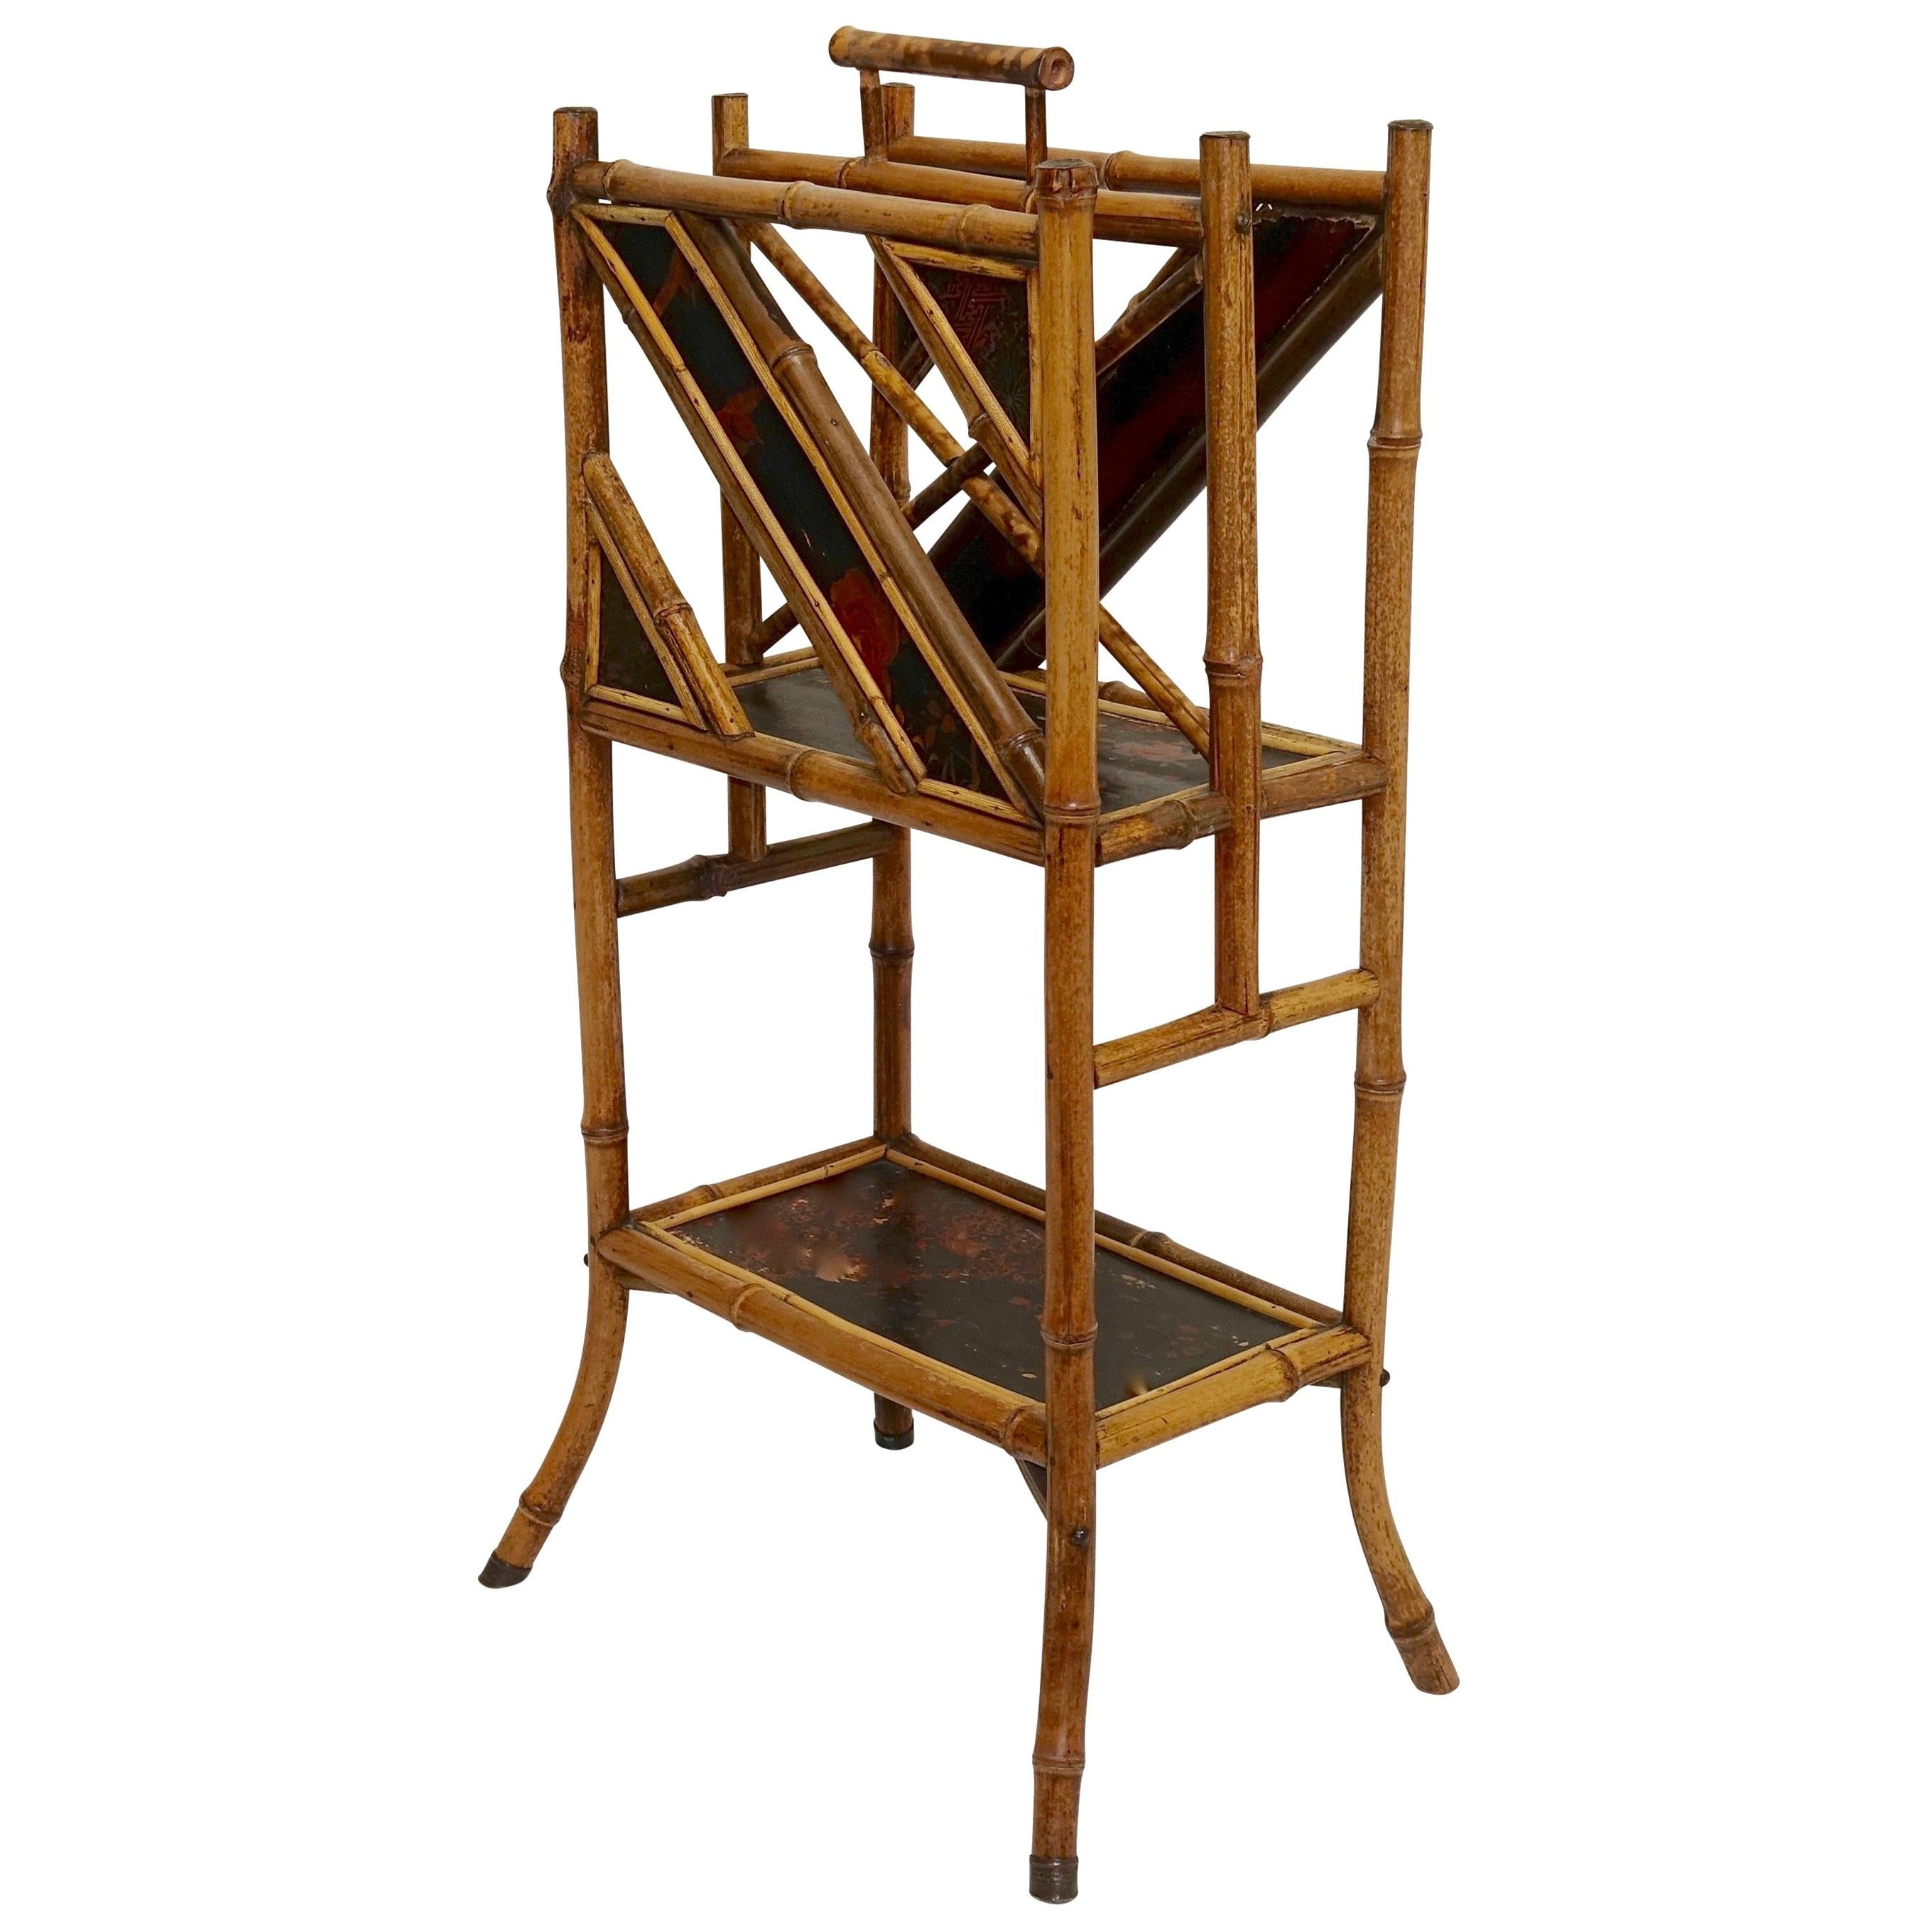 Bamboo Magazine Rack with Lacquer Panels, 19th Century